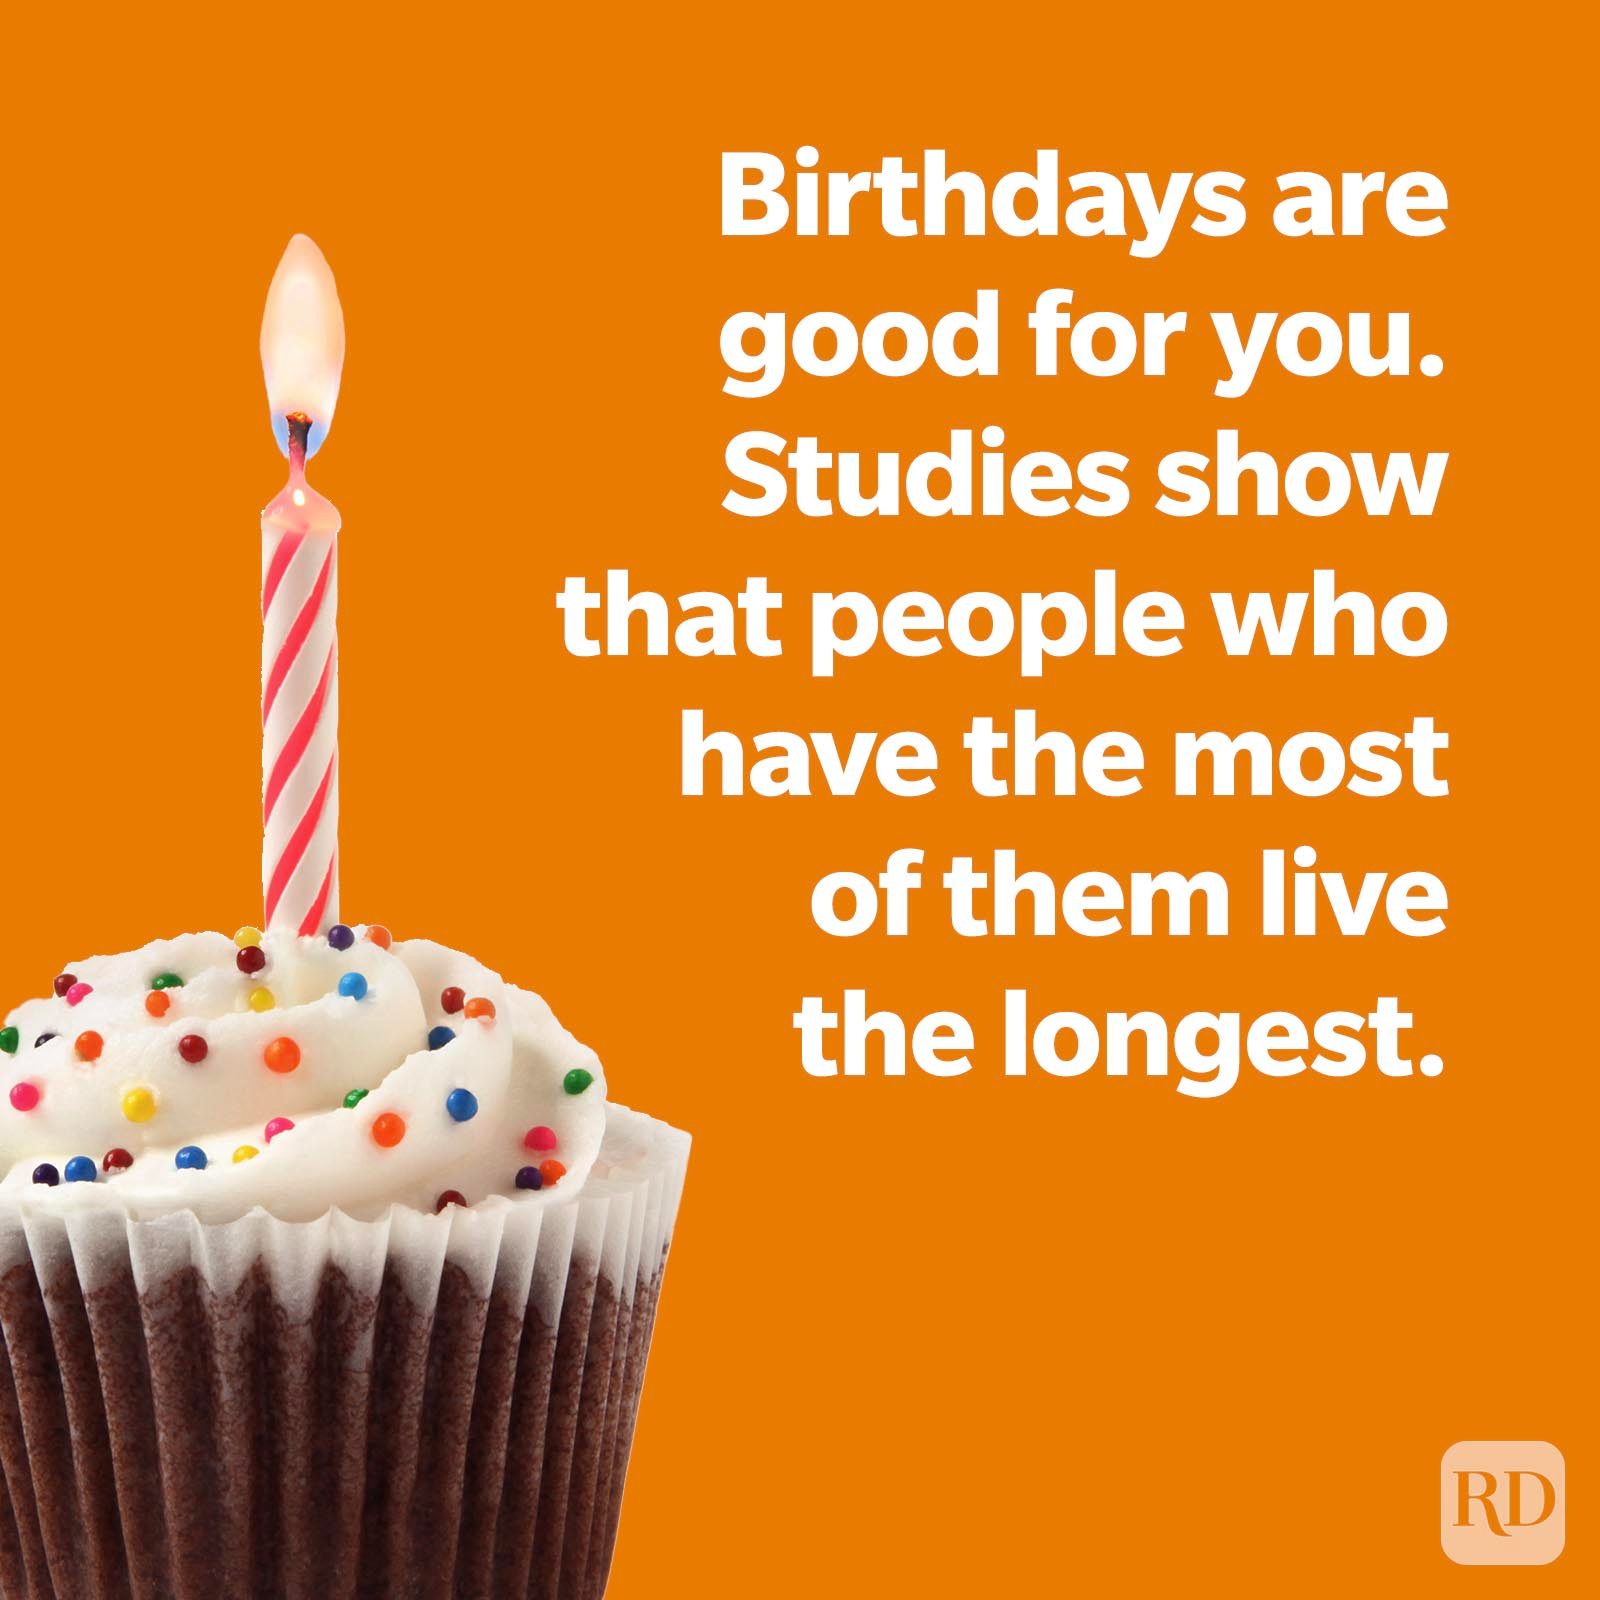 Birthdays are good for you. Studies show that people who have the most of them live the longest.